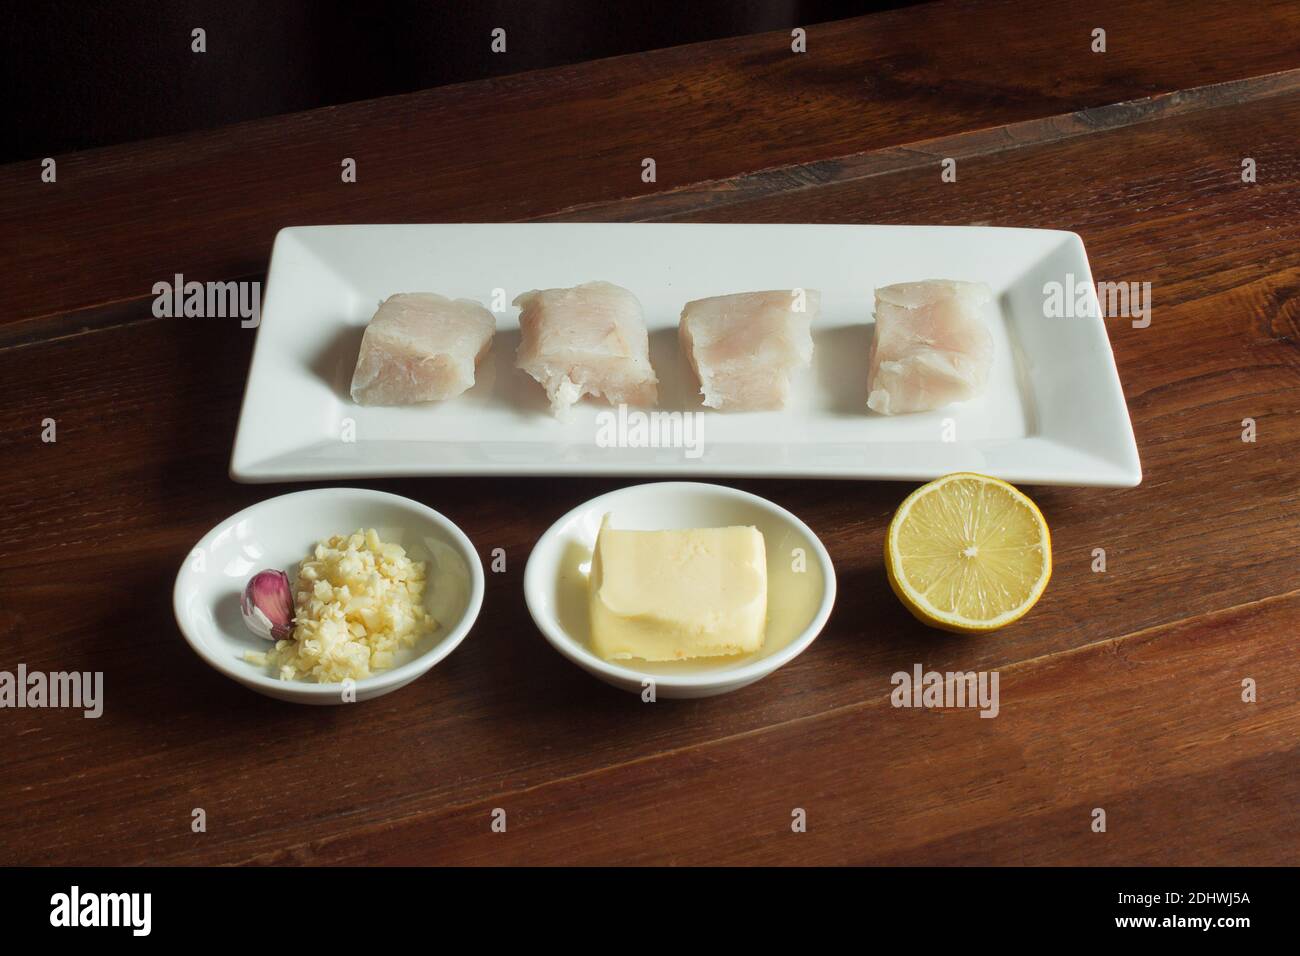 Food plating and presentation of raw food on an old wooden table. Hake, butter, garlic, and half a lemon. Stock Photo